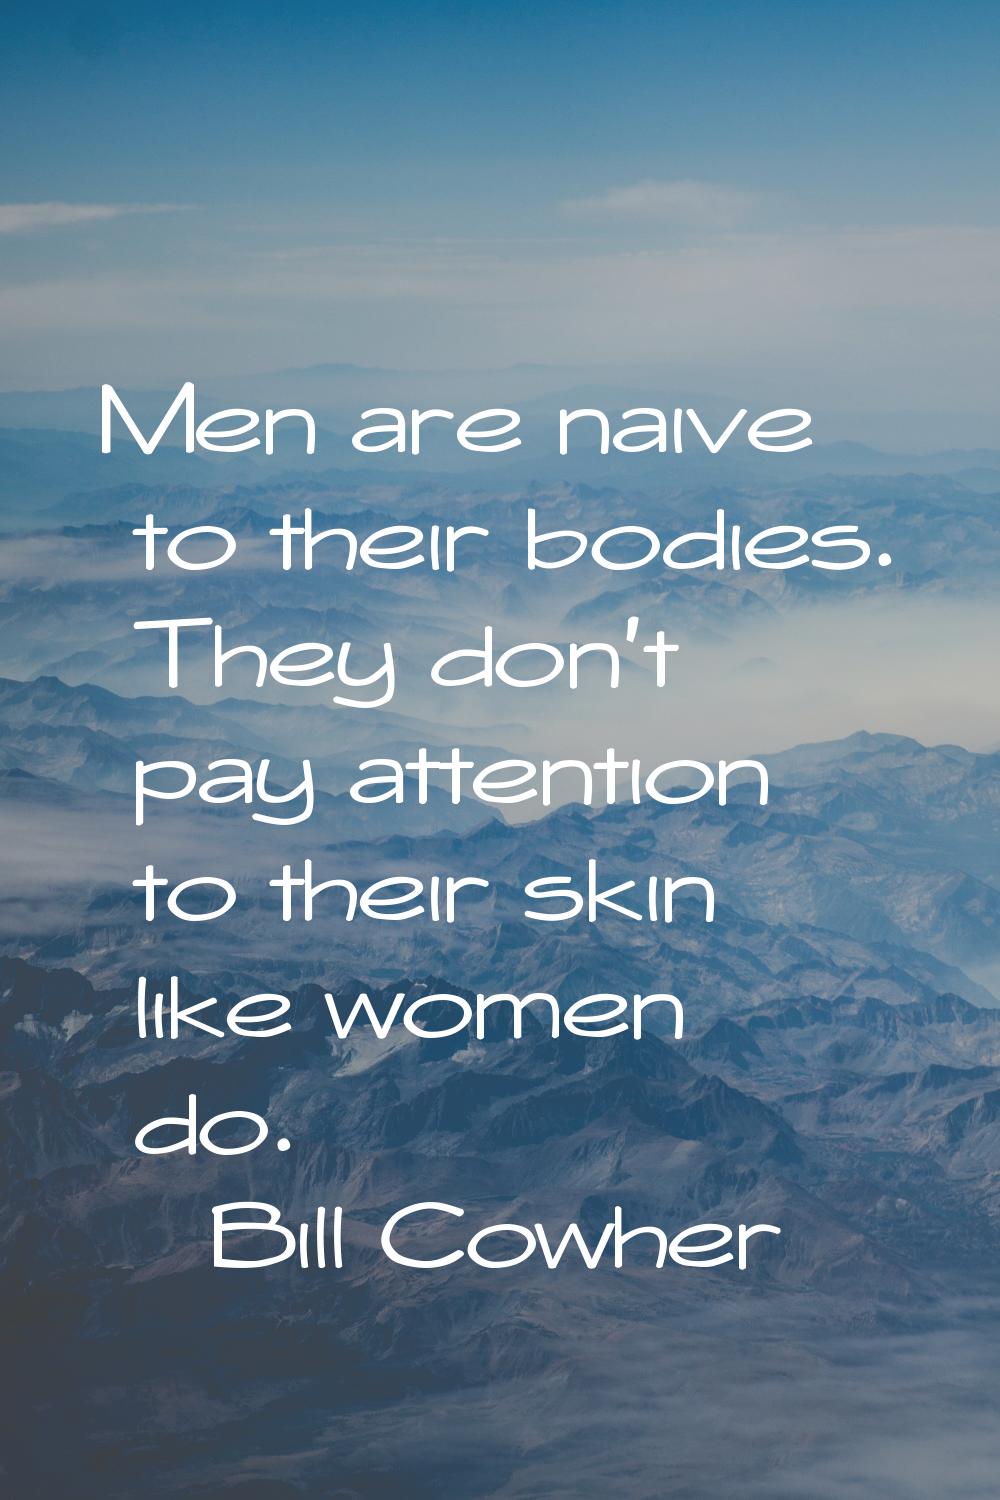 Men are naive to their bodies. They don't pay attention to their skin like women do.